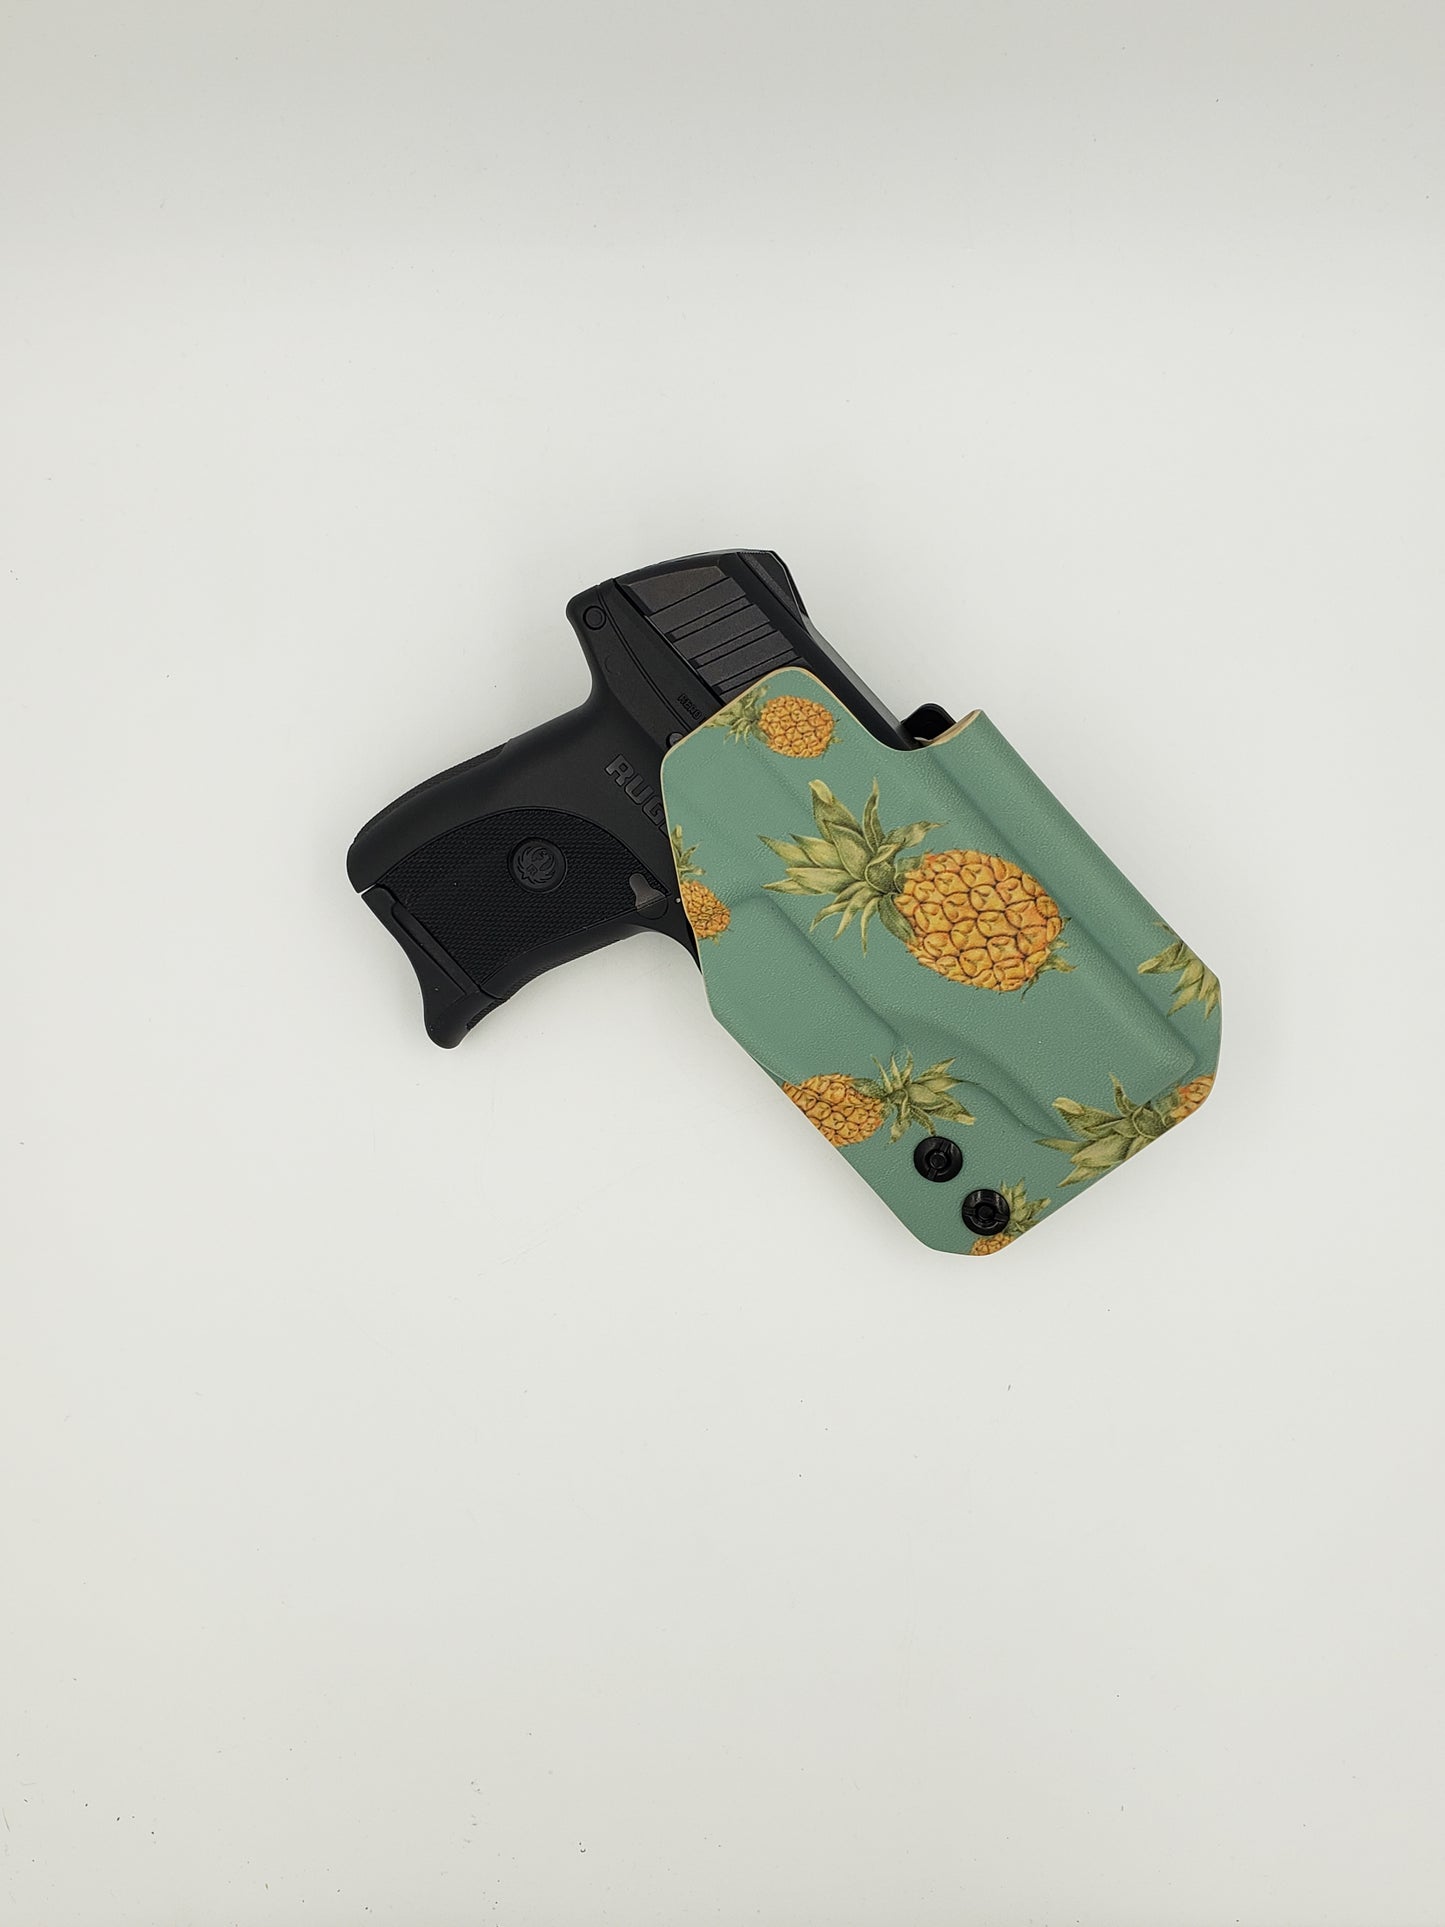 Teal Pineapple IWB Kydex Holster - Ruger LC9(s) Southern Bullets